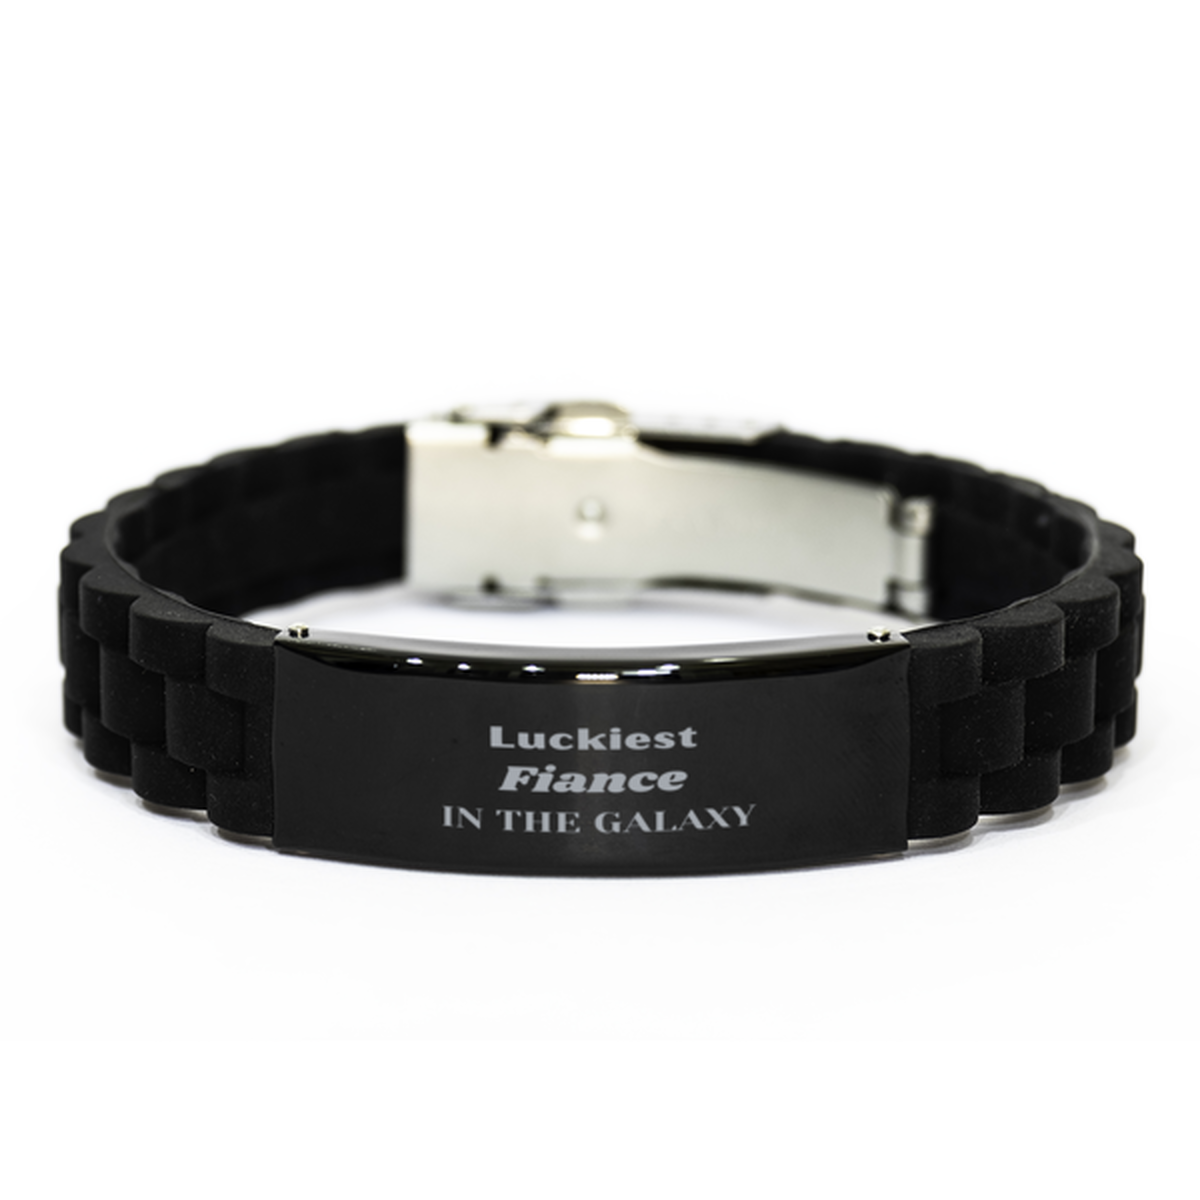 Luckiest Fiance in the Galaxy, To My Fiance Engraved Gifts, Christmas Fiance Black Glidelock Clasp Bracelet Gifts, X-mas Birthday Unique Gifts For Fiance Men Women